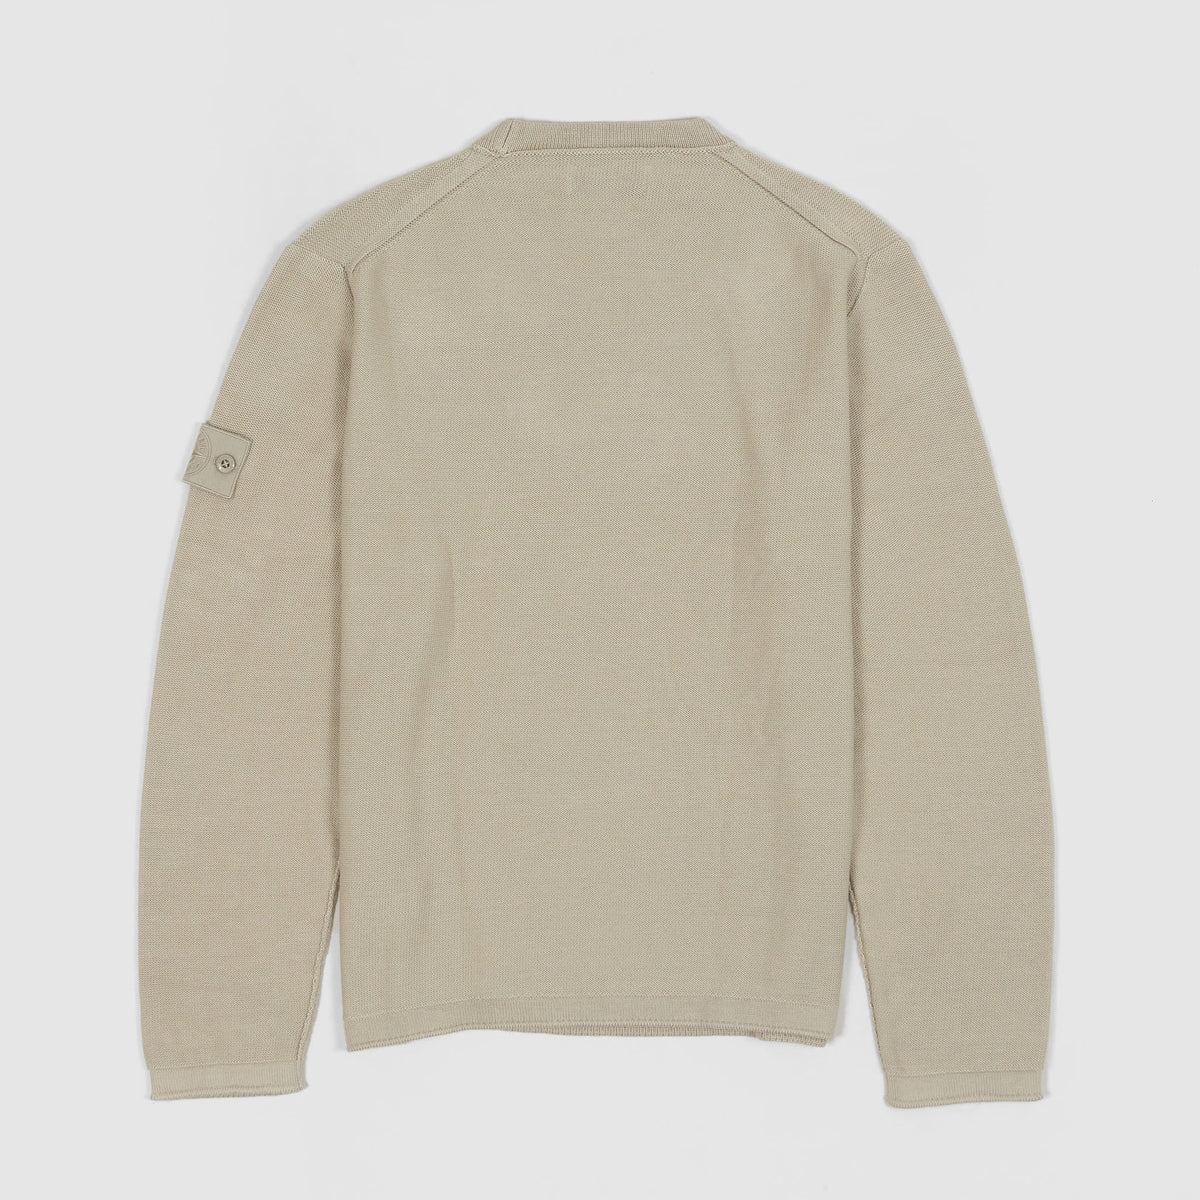 Stone Island Ghost Piece Knitted Lightweight Crew Neck Pullover